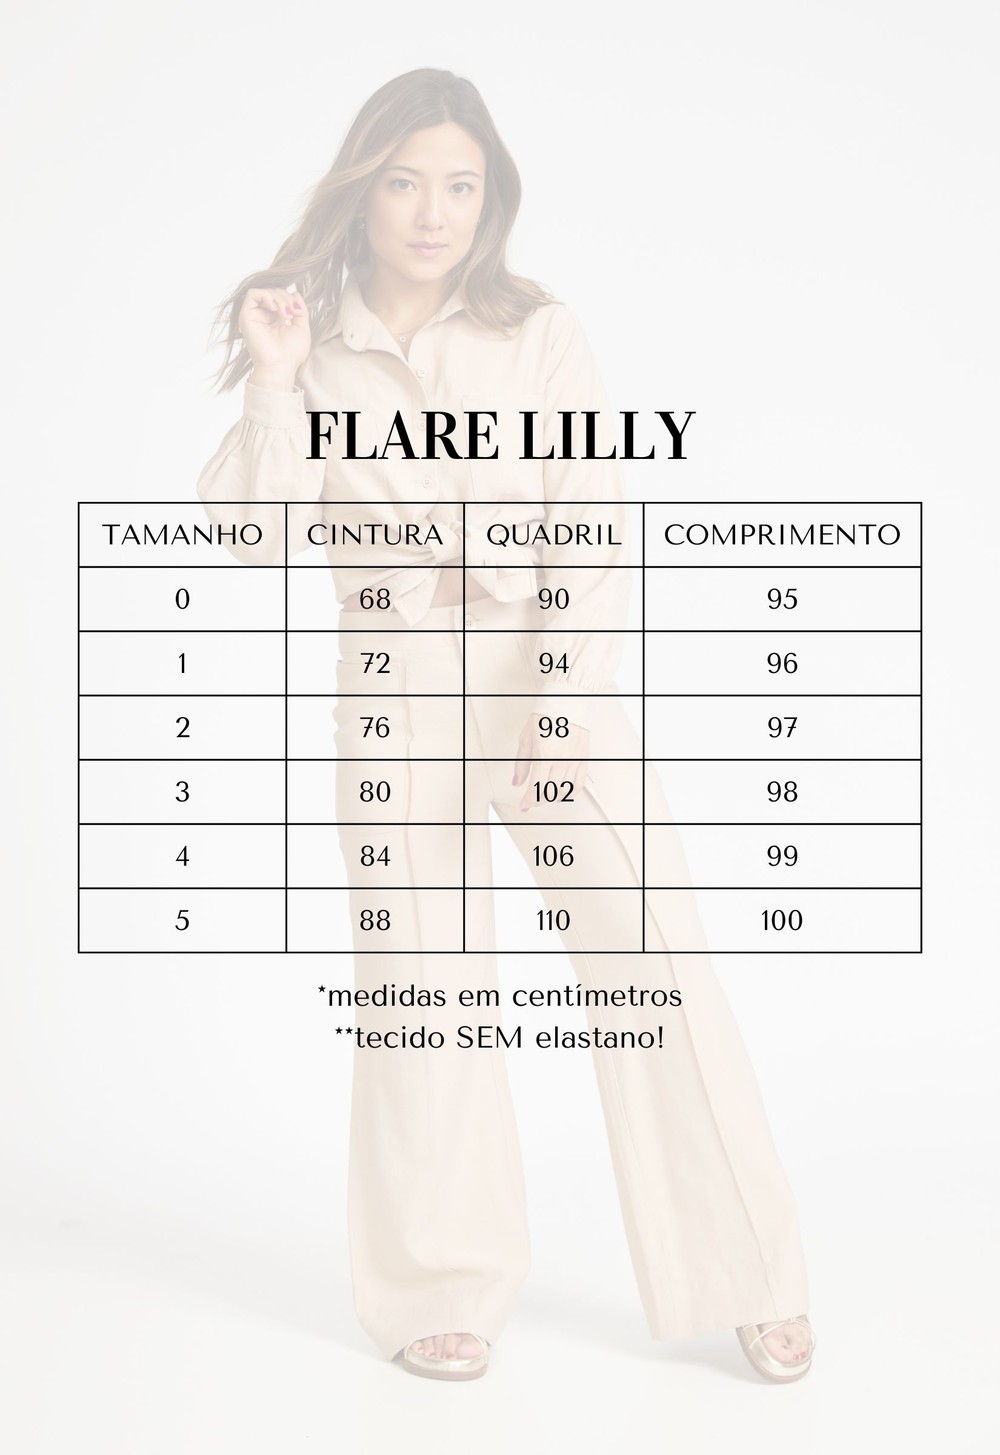 FLARE LILLY MALBEC